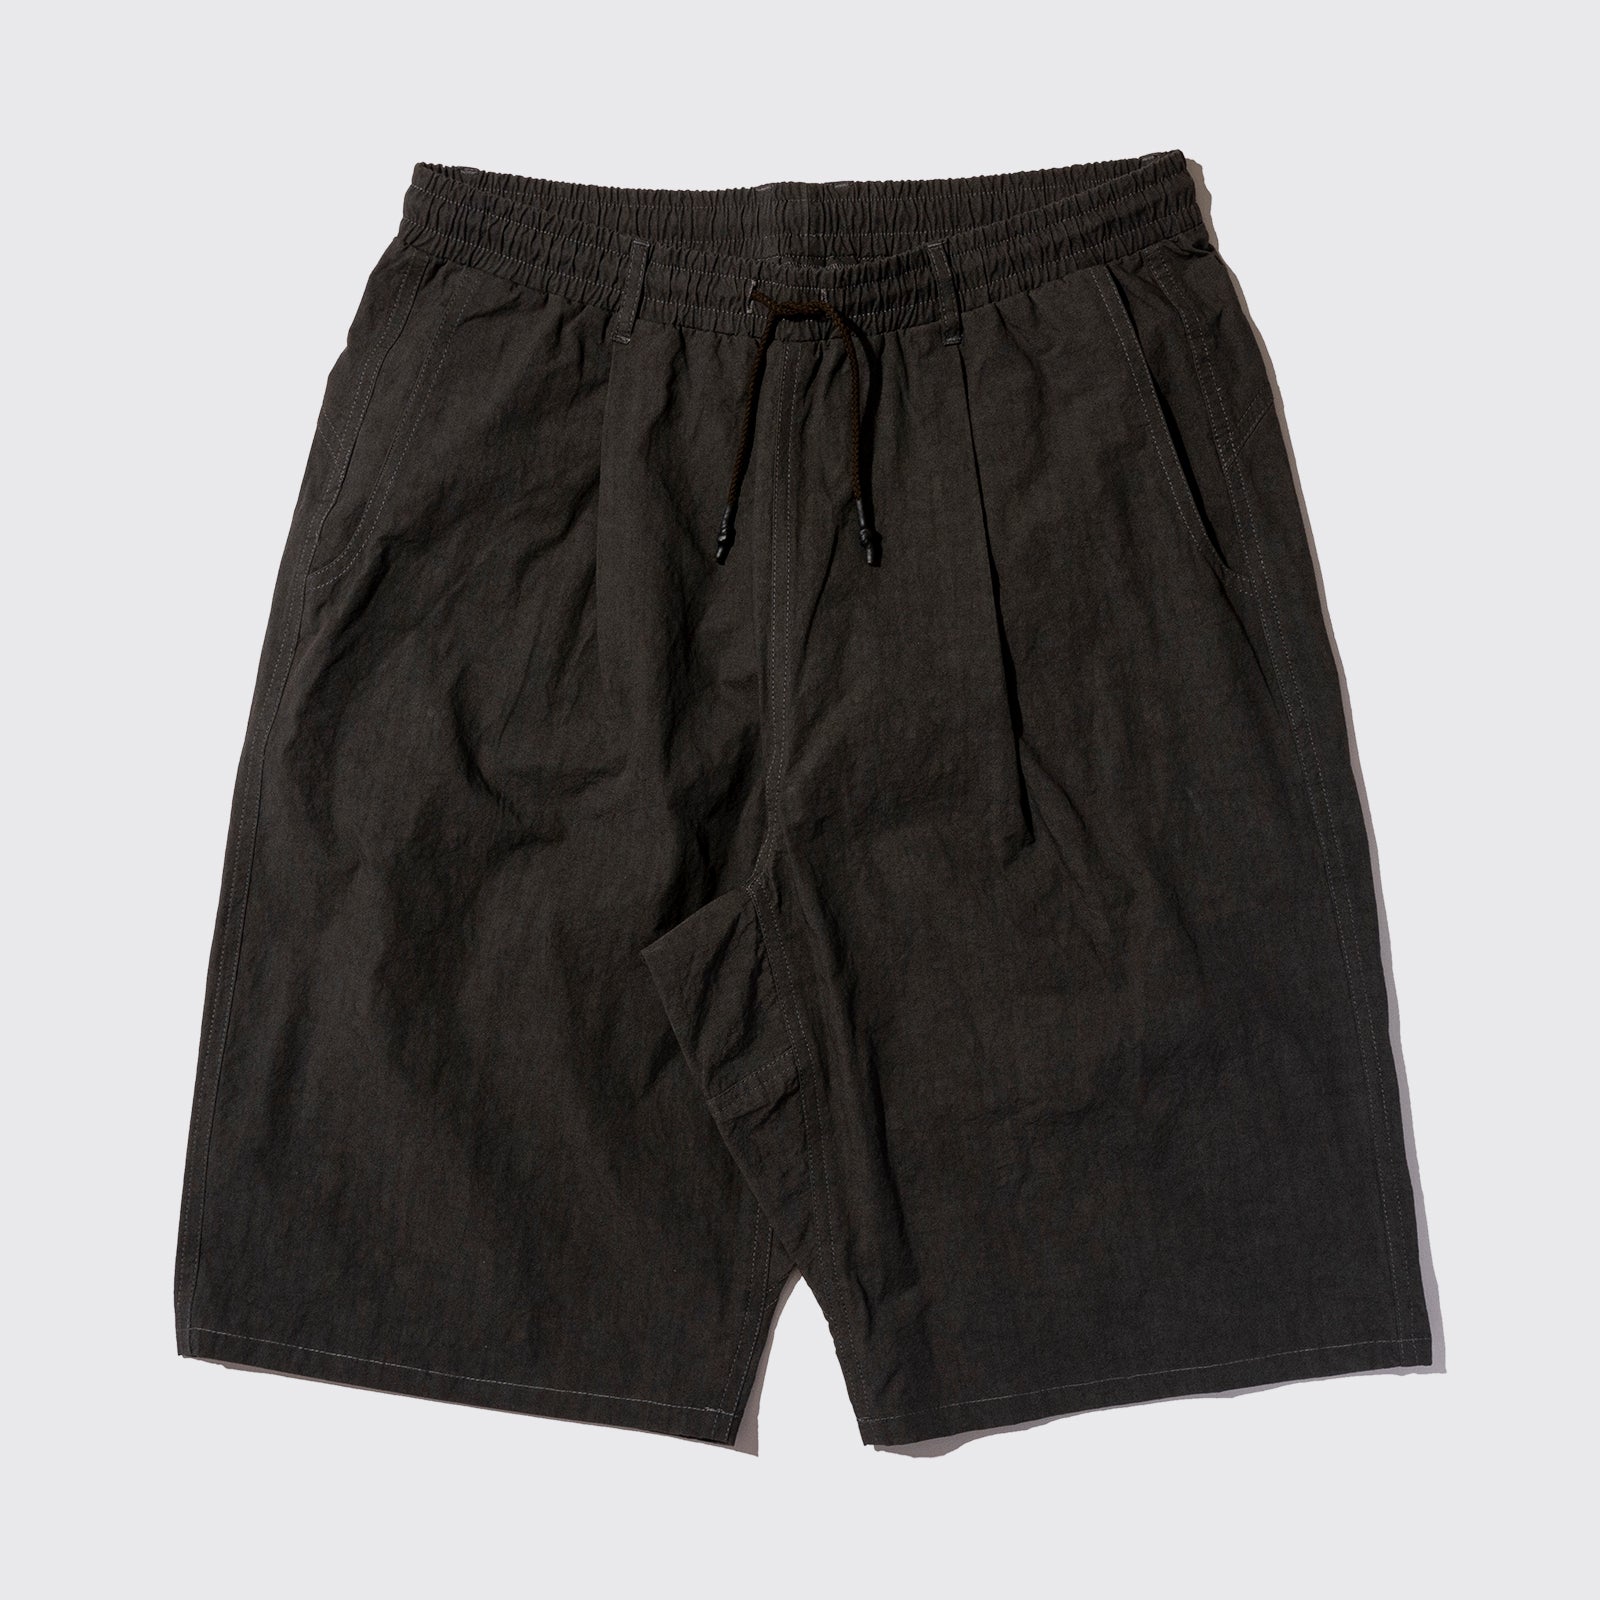 WEST MTN NYCO SHORTS (Carbon)